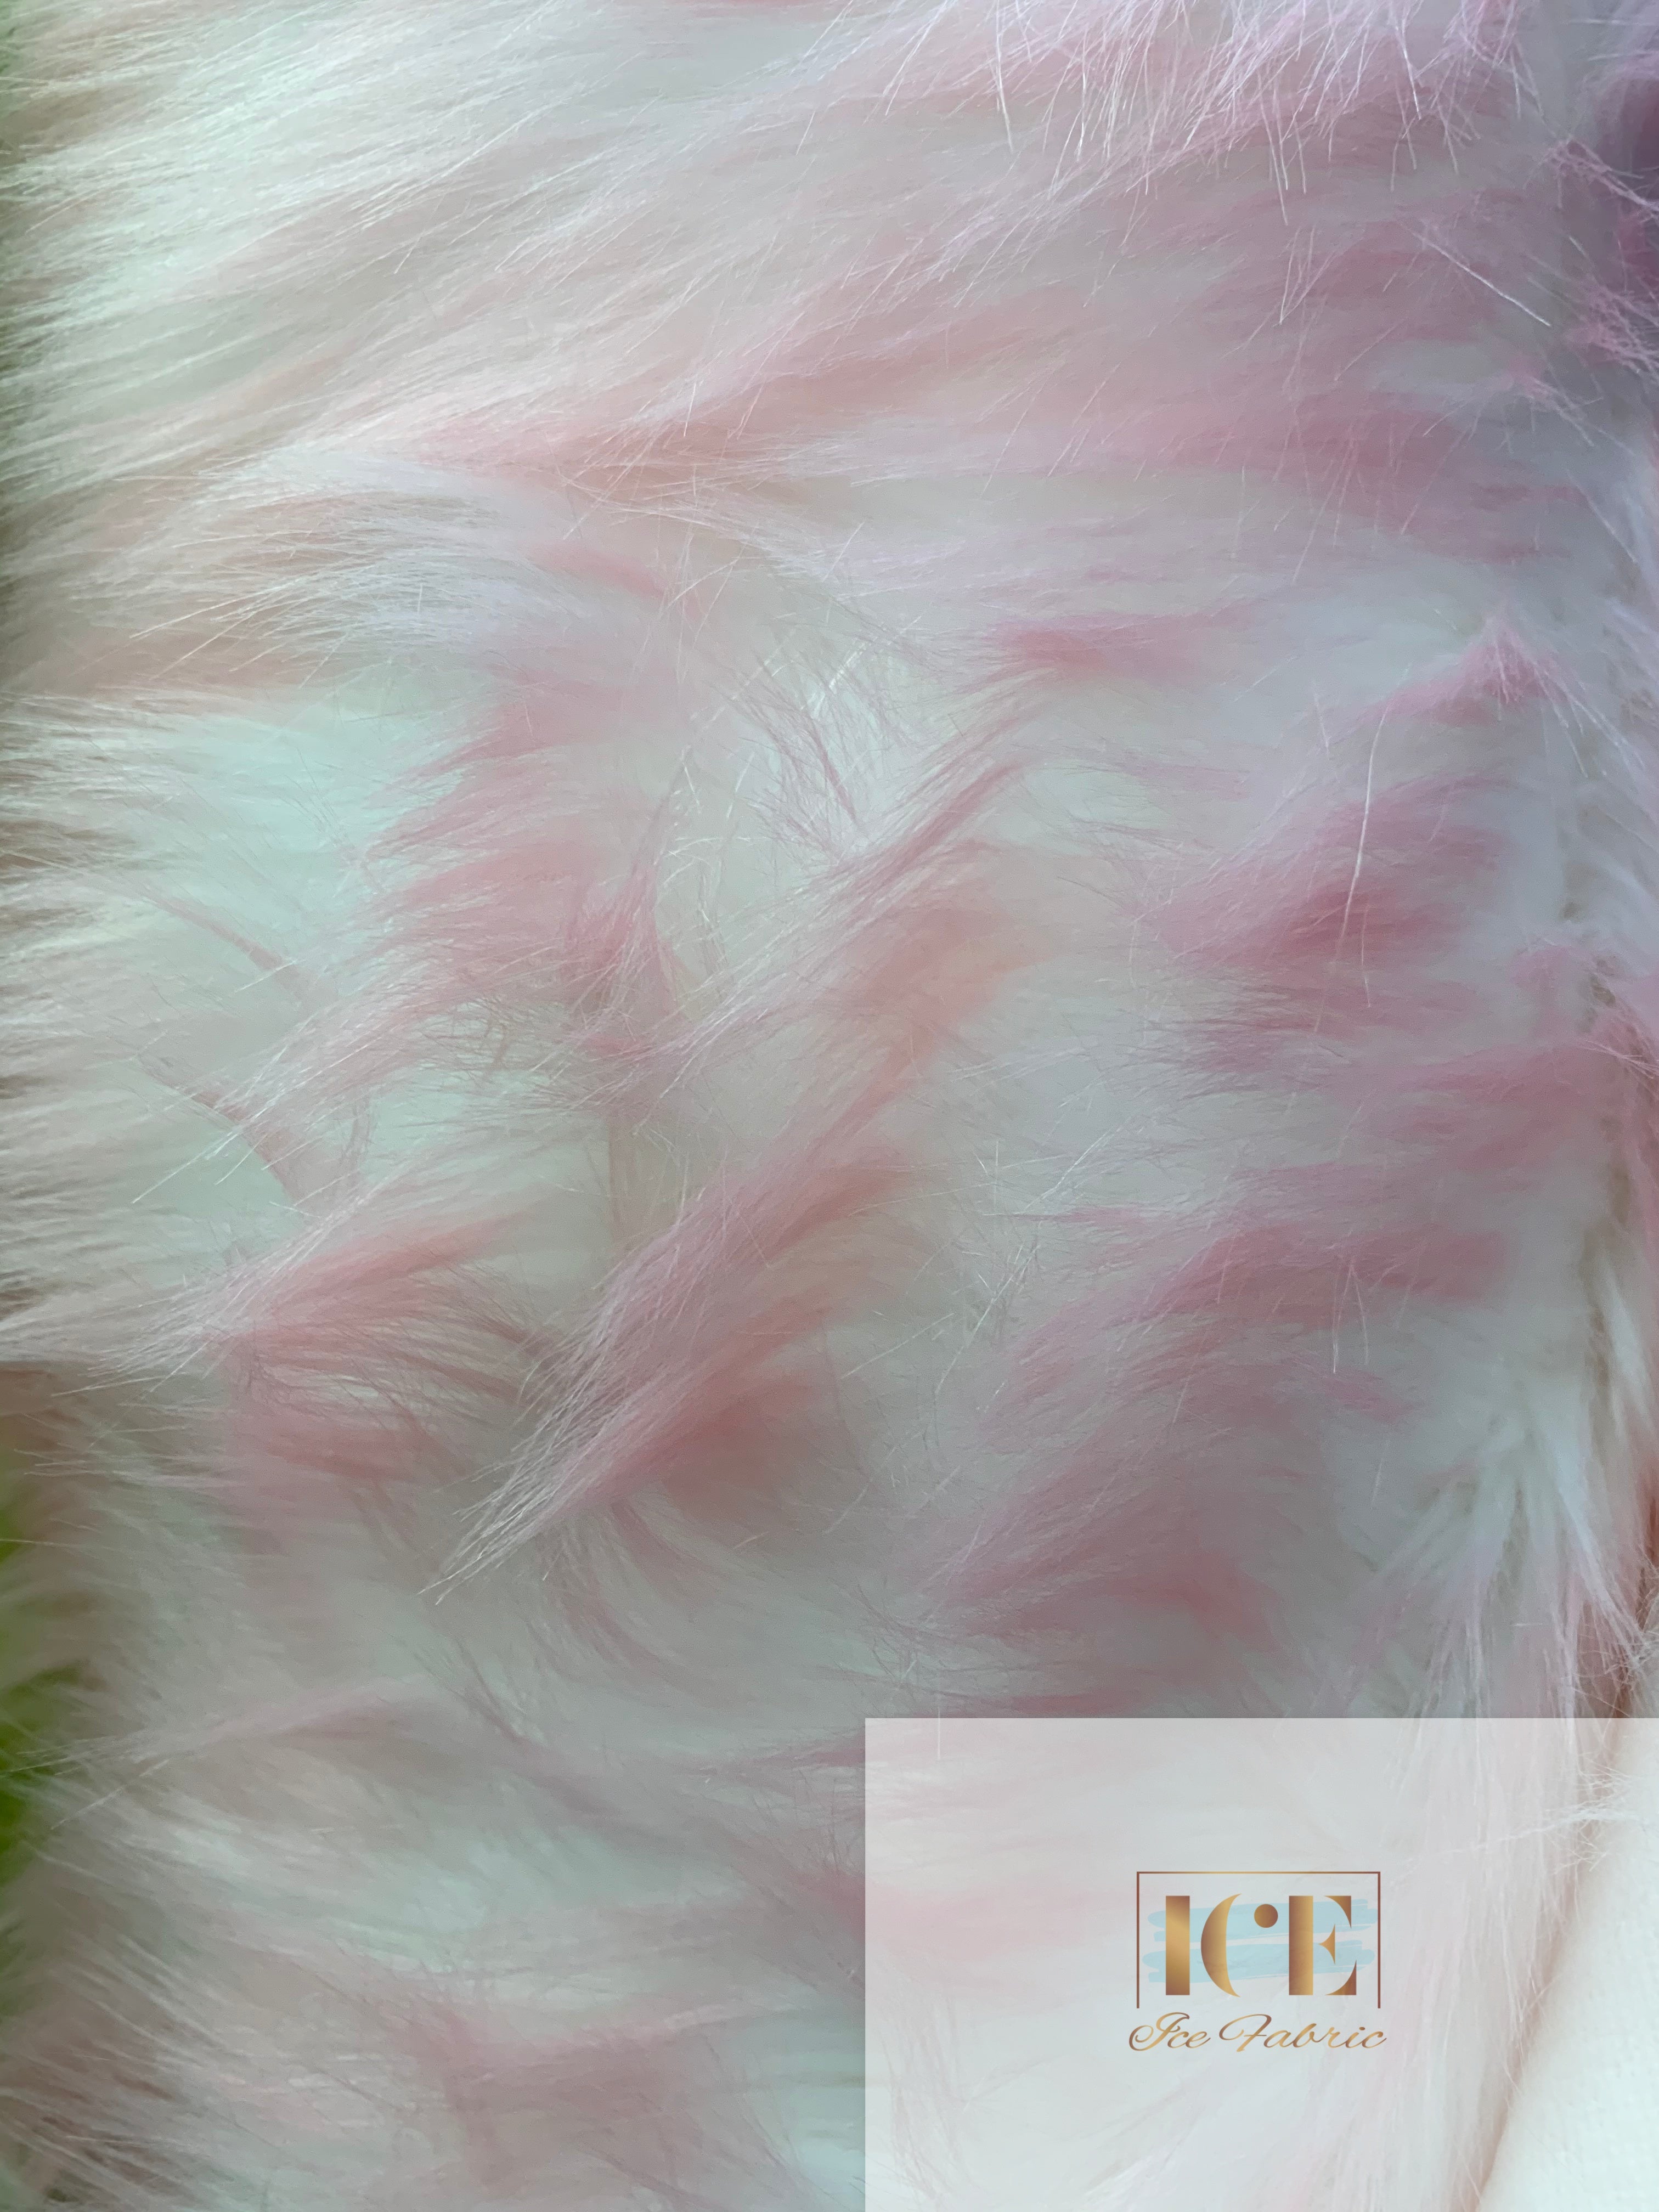 Canadian Fox 2 Tone Shaggy Long Pile Faux Fur Fabric For Blankets, Costumes, Bed SpreadICEFABRICICE FABRICSLight PinkBy The Yard (60 inches Wide)Canadian Fox 2 Tone Shaggy Long Pile Faux Fur Fabric For Blankets, Costumes, Bed Spread ICEFABRIC Light Pink